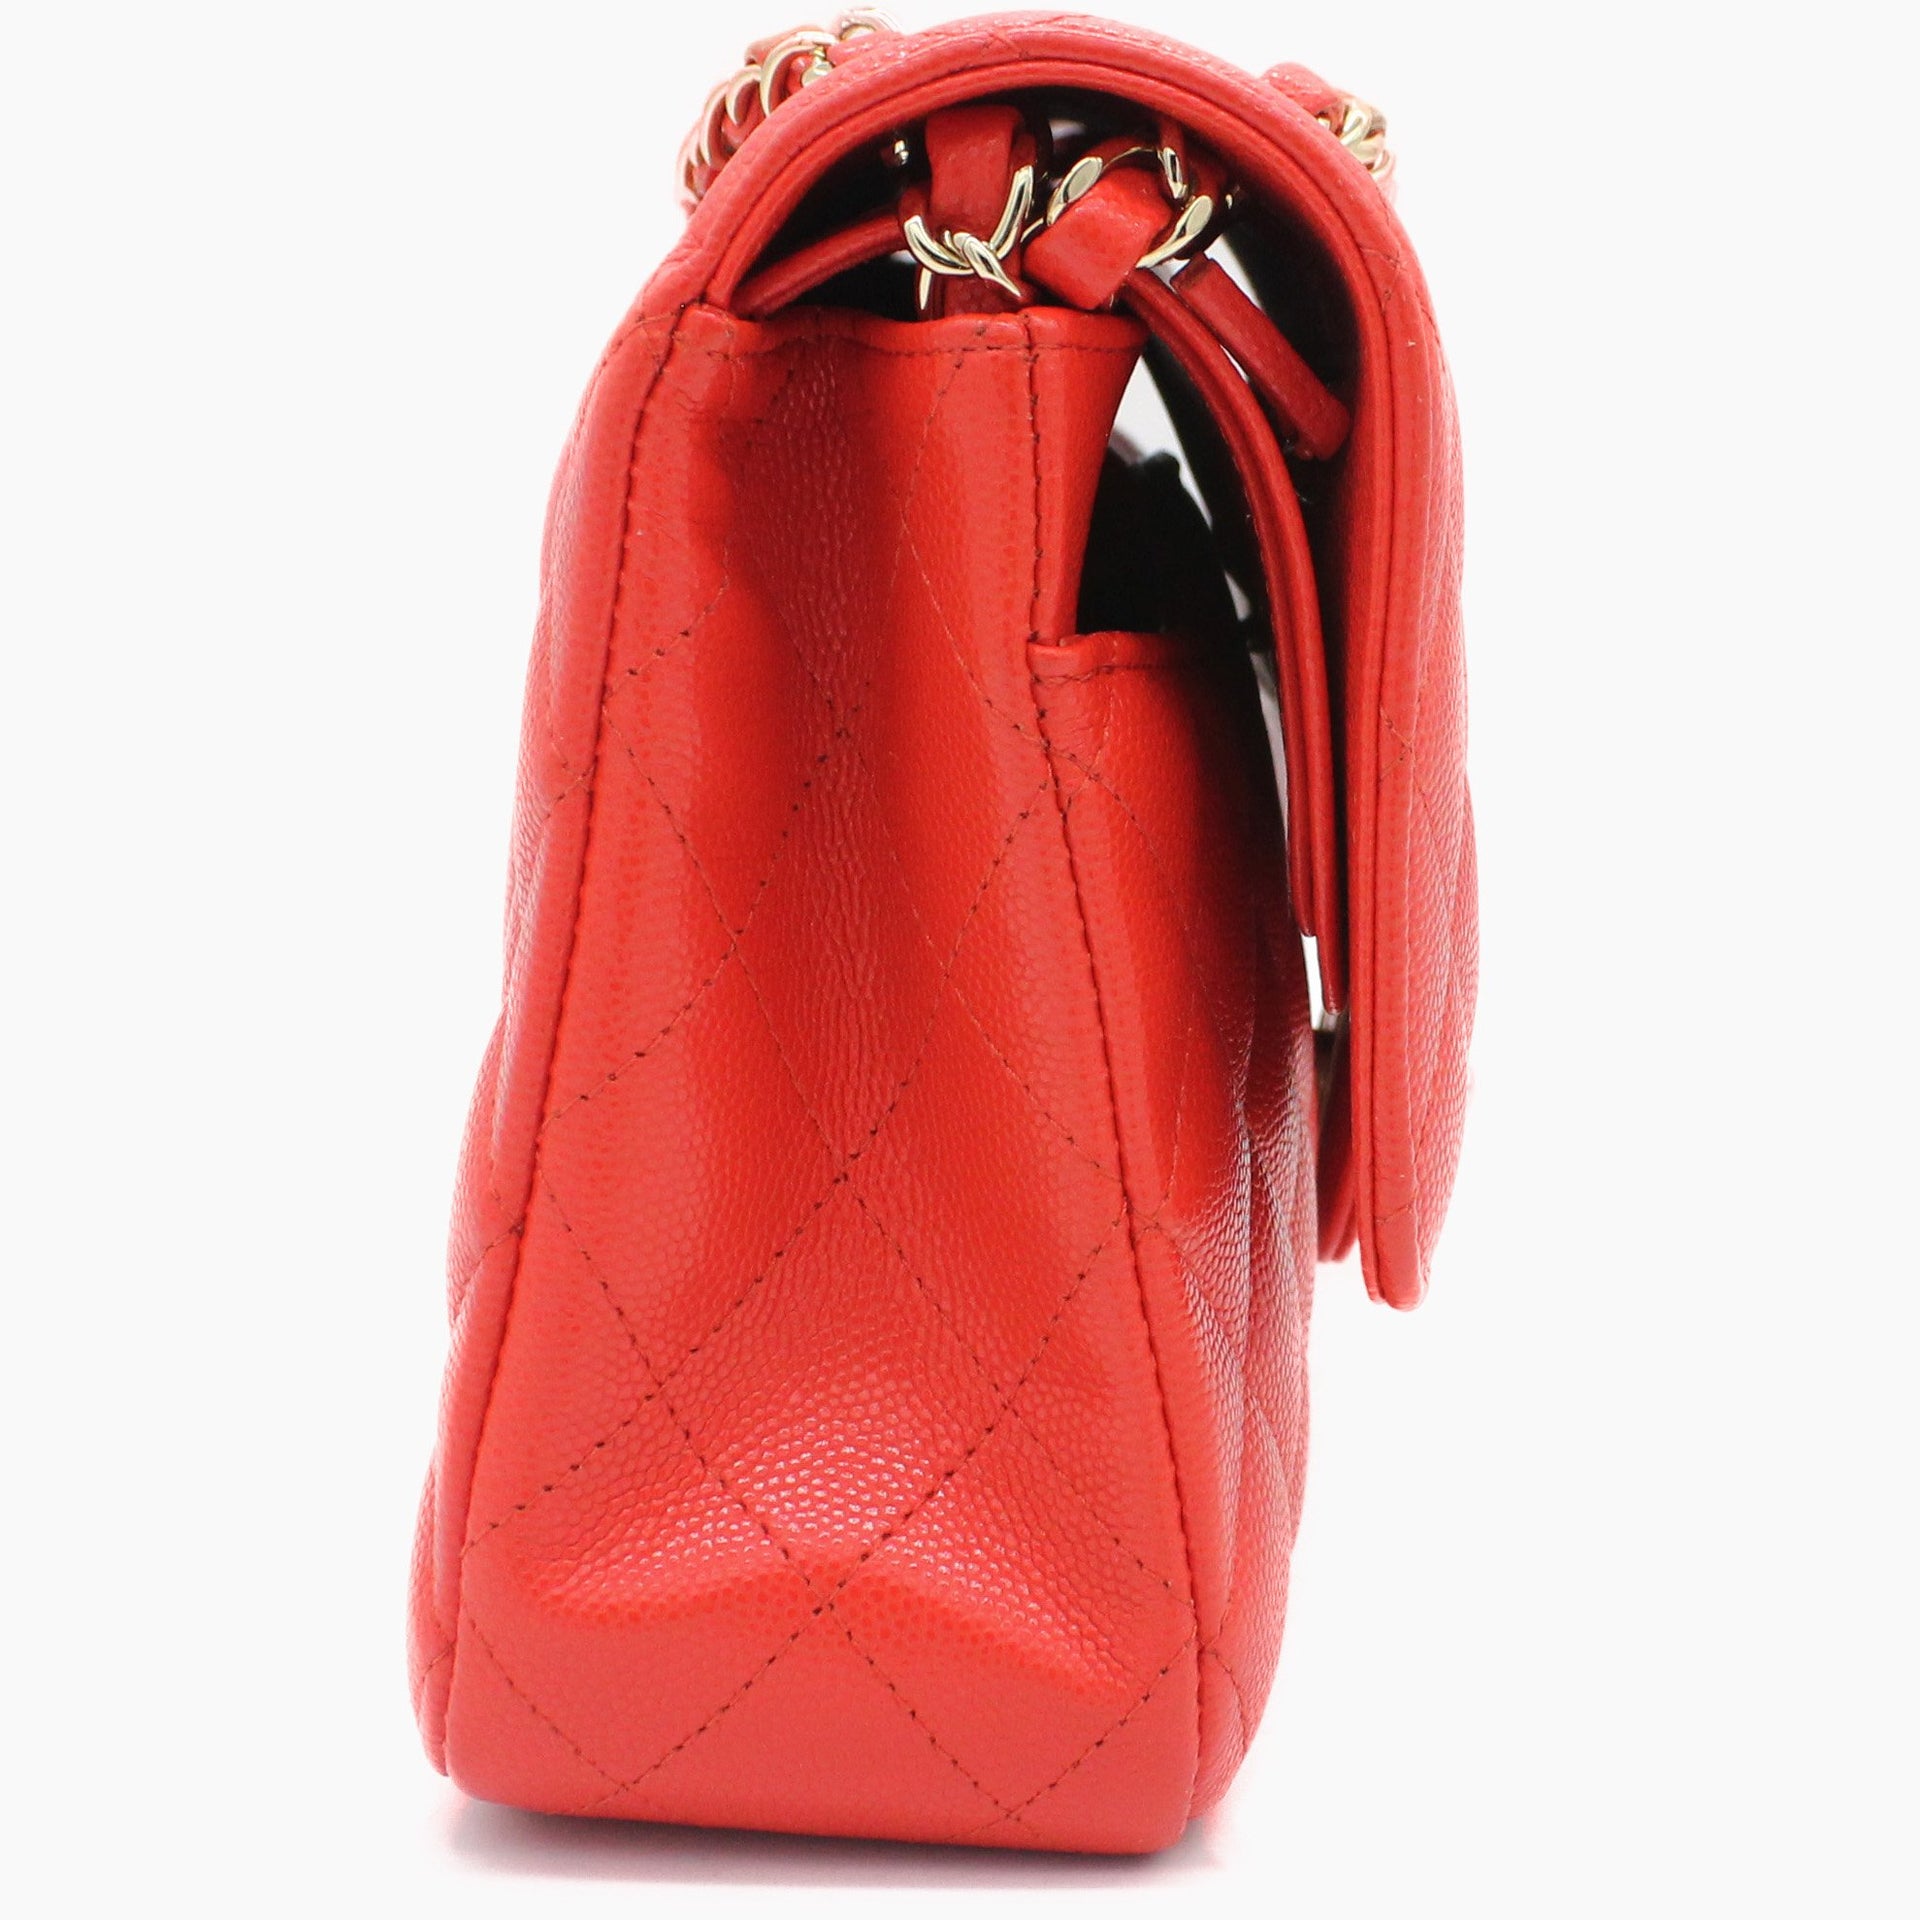 Red Quilted Caviar Leather Classic Double Flap Bag